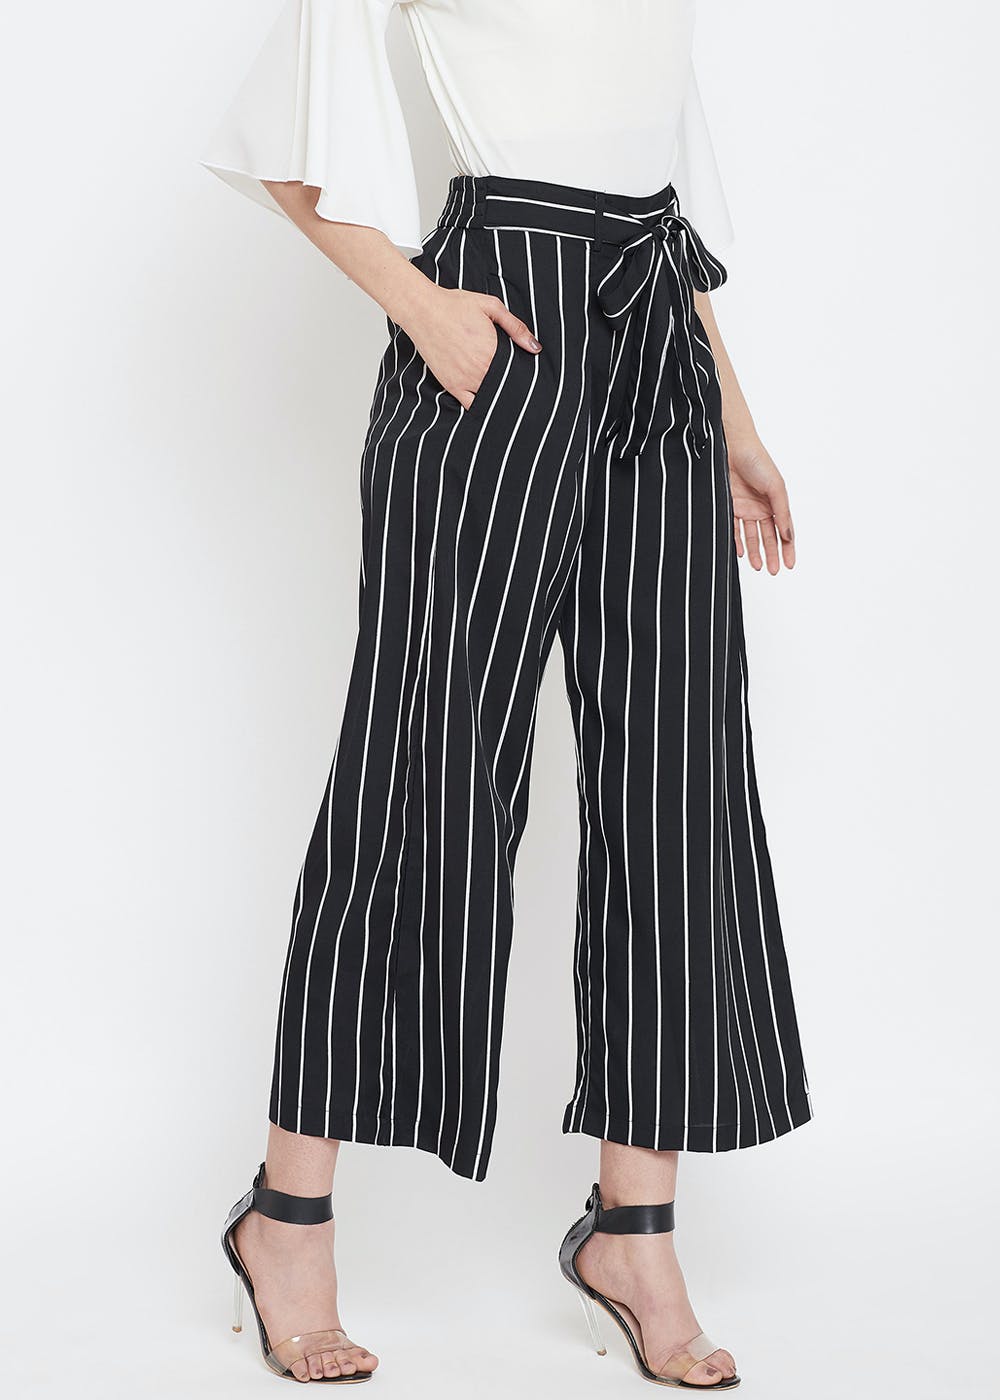 Buy INFISPACE Women High waisted Blue Striped Palazzo Trouser Pants for  FormalCasual wear with Pockets Free size Upto 34 inches at Amazonin